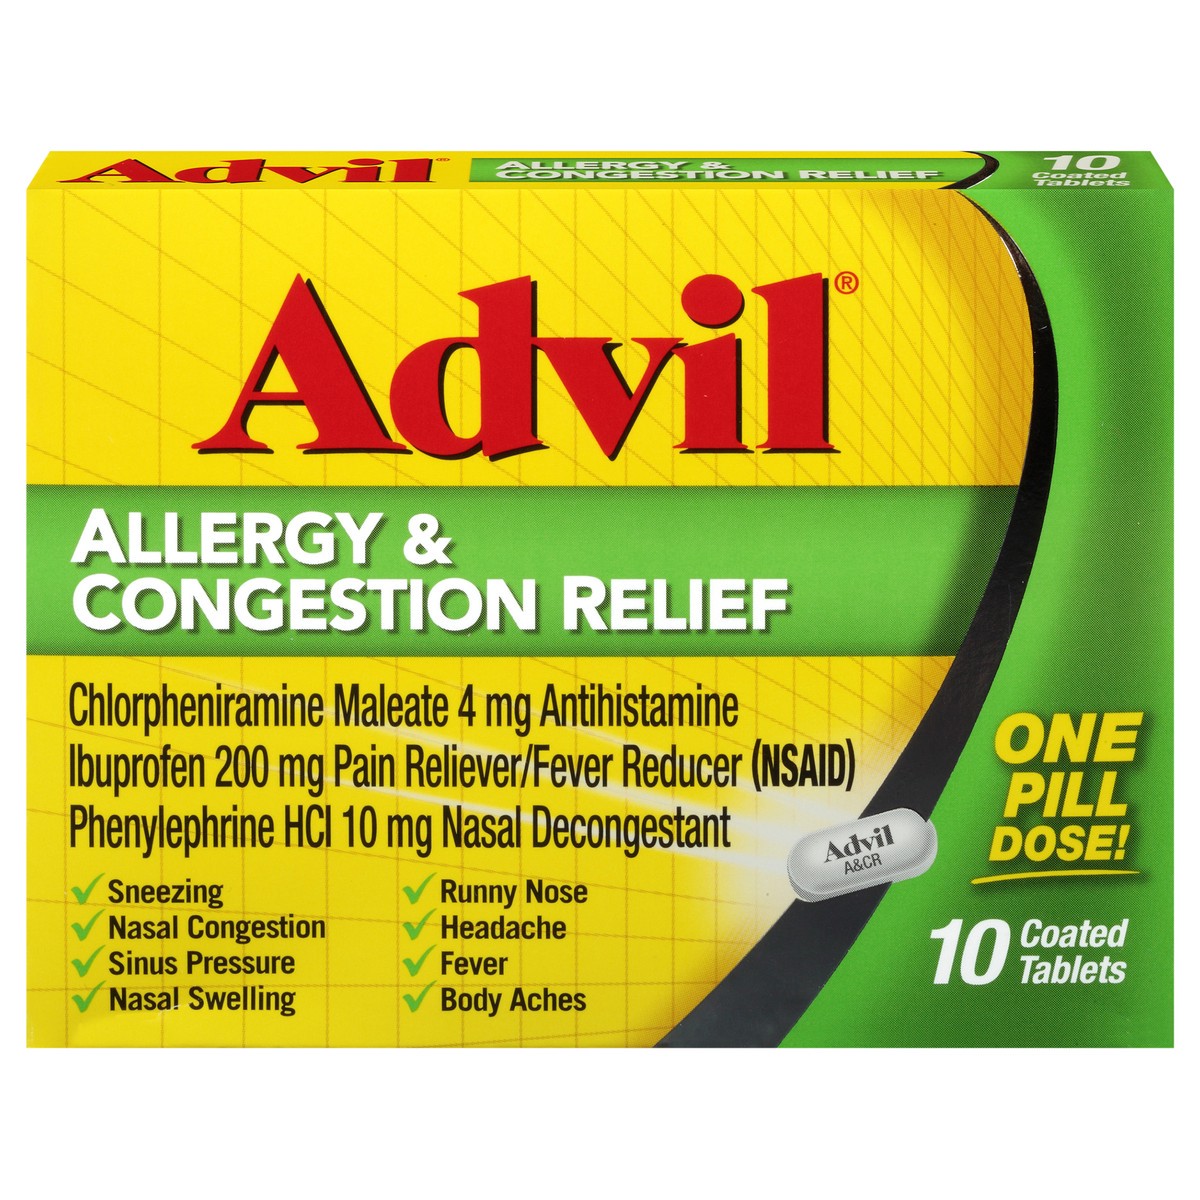 slide 10 of 10, Advil Allergy & Congestion Relief, Coated Tablets, 10 ct